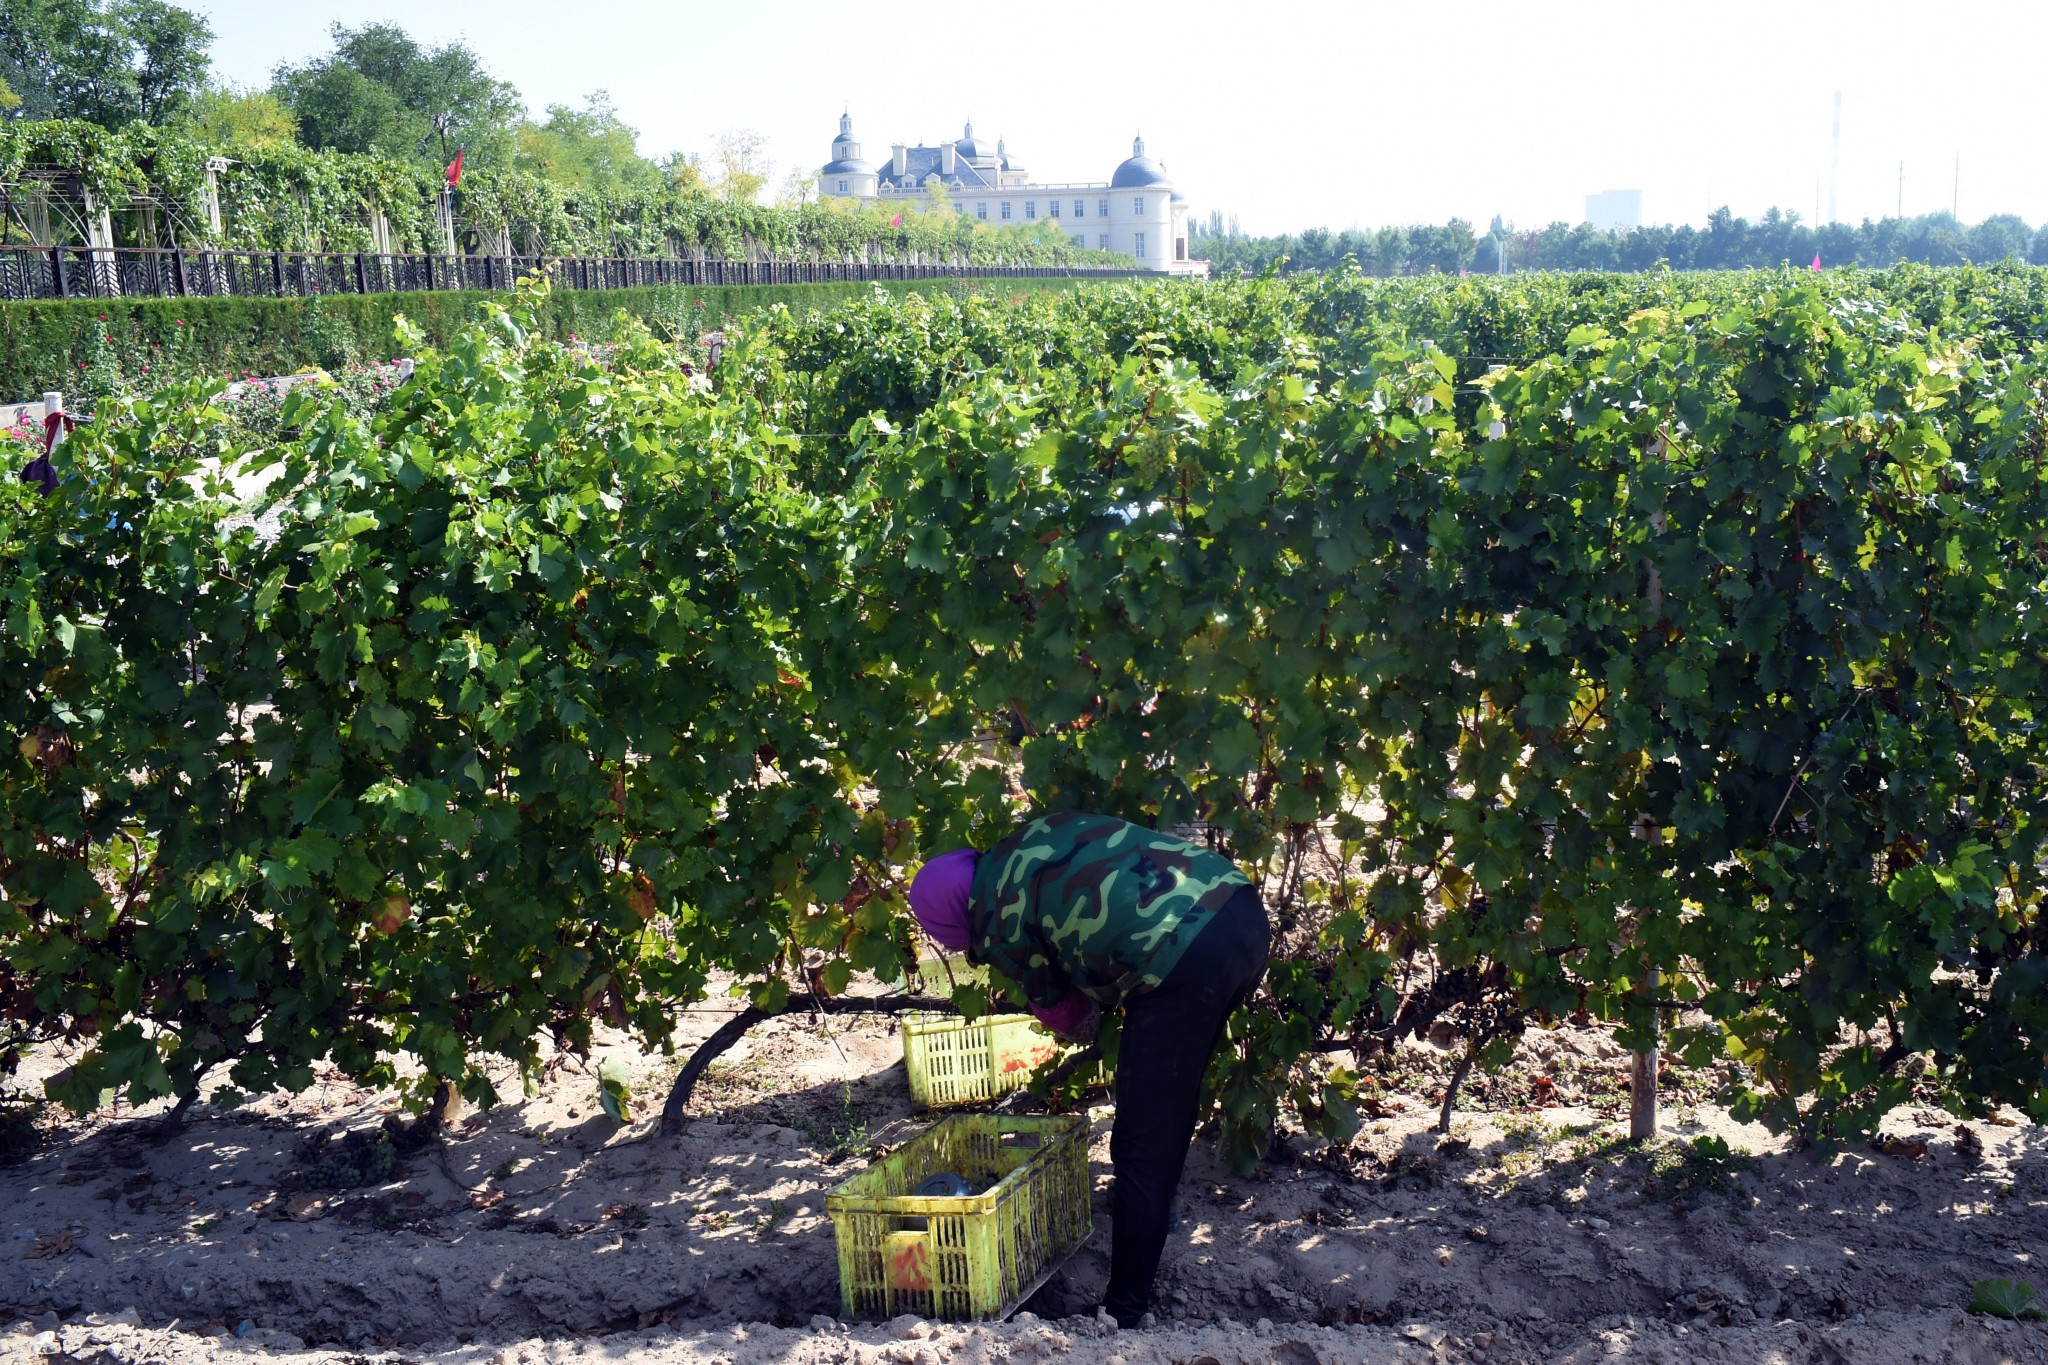 China's Ningxia Region Outlines Ambitious Wine Sector Targets by 2035